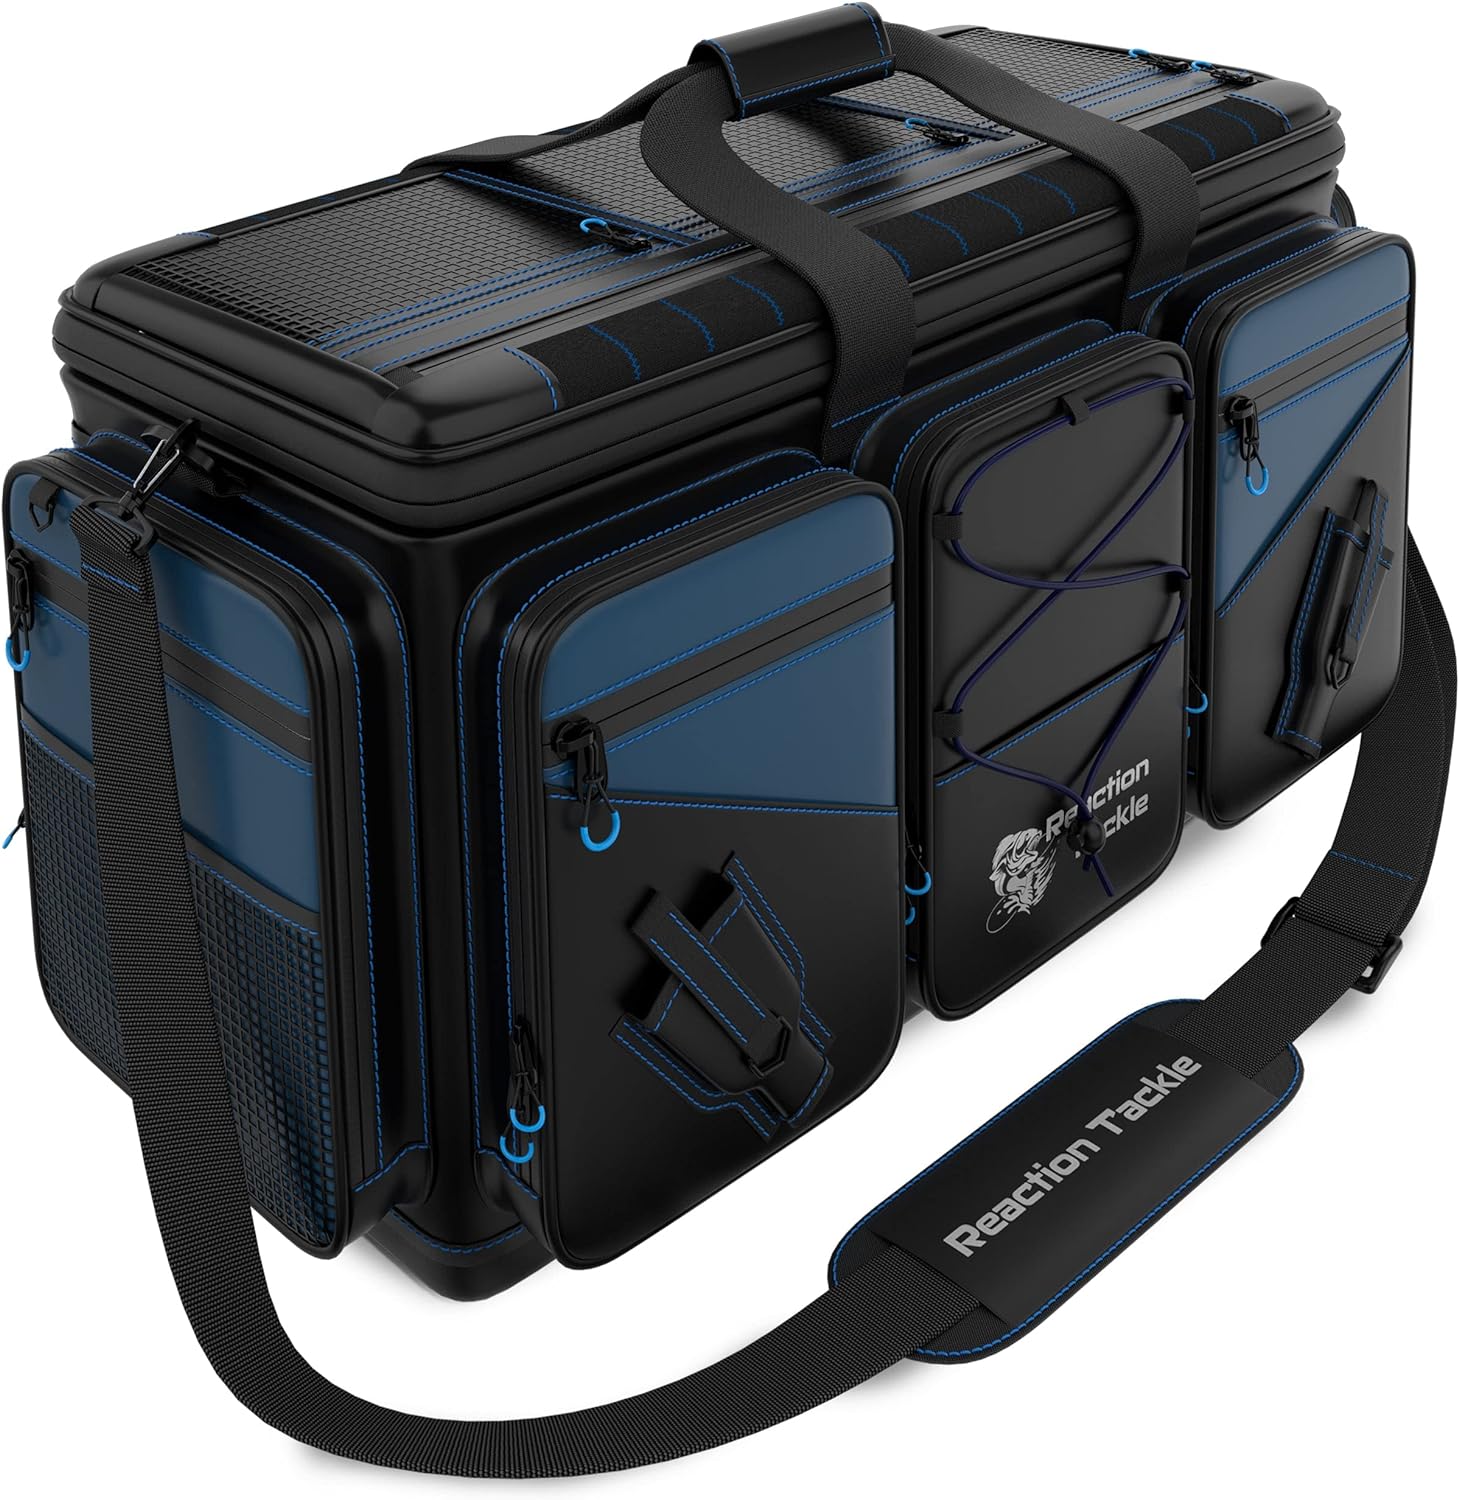 The Reaction Tackle Fishing Bag Might Be the Only Tackle Box You Need